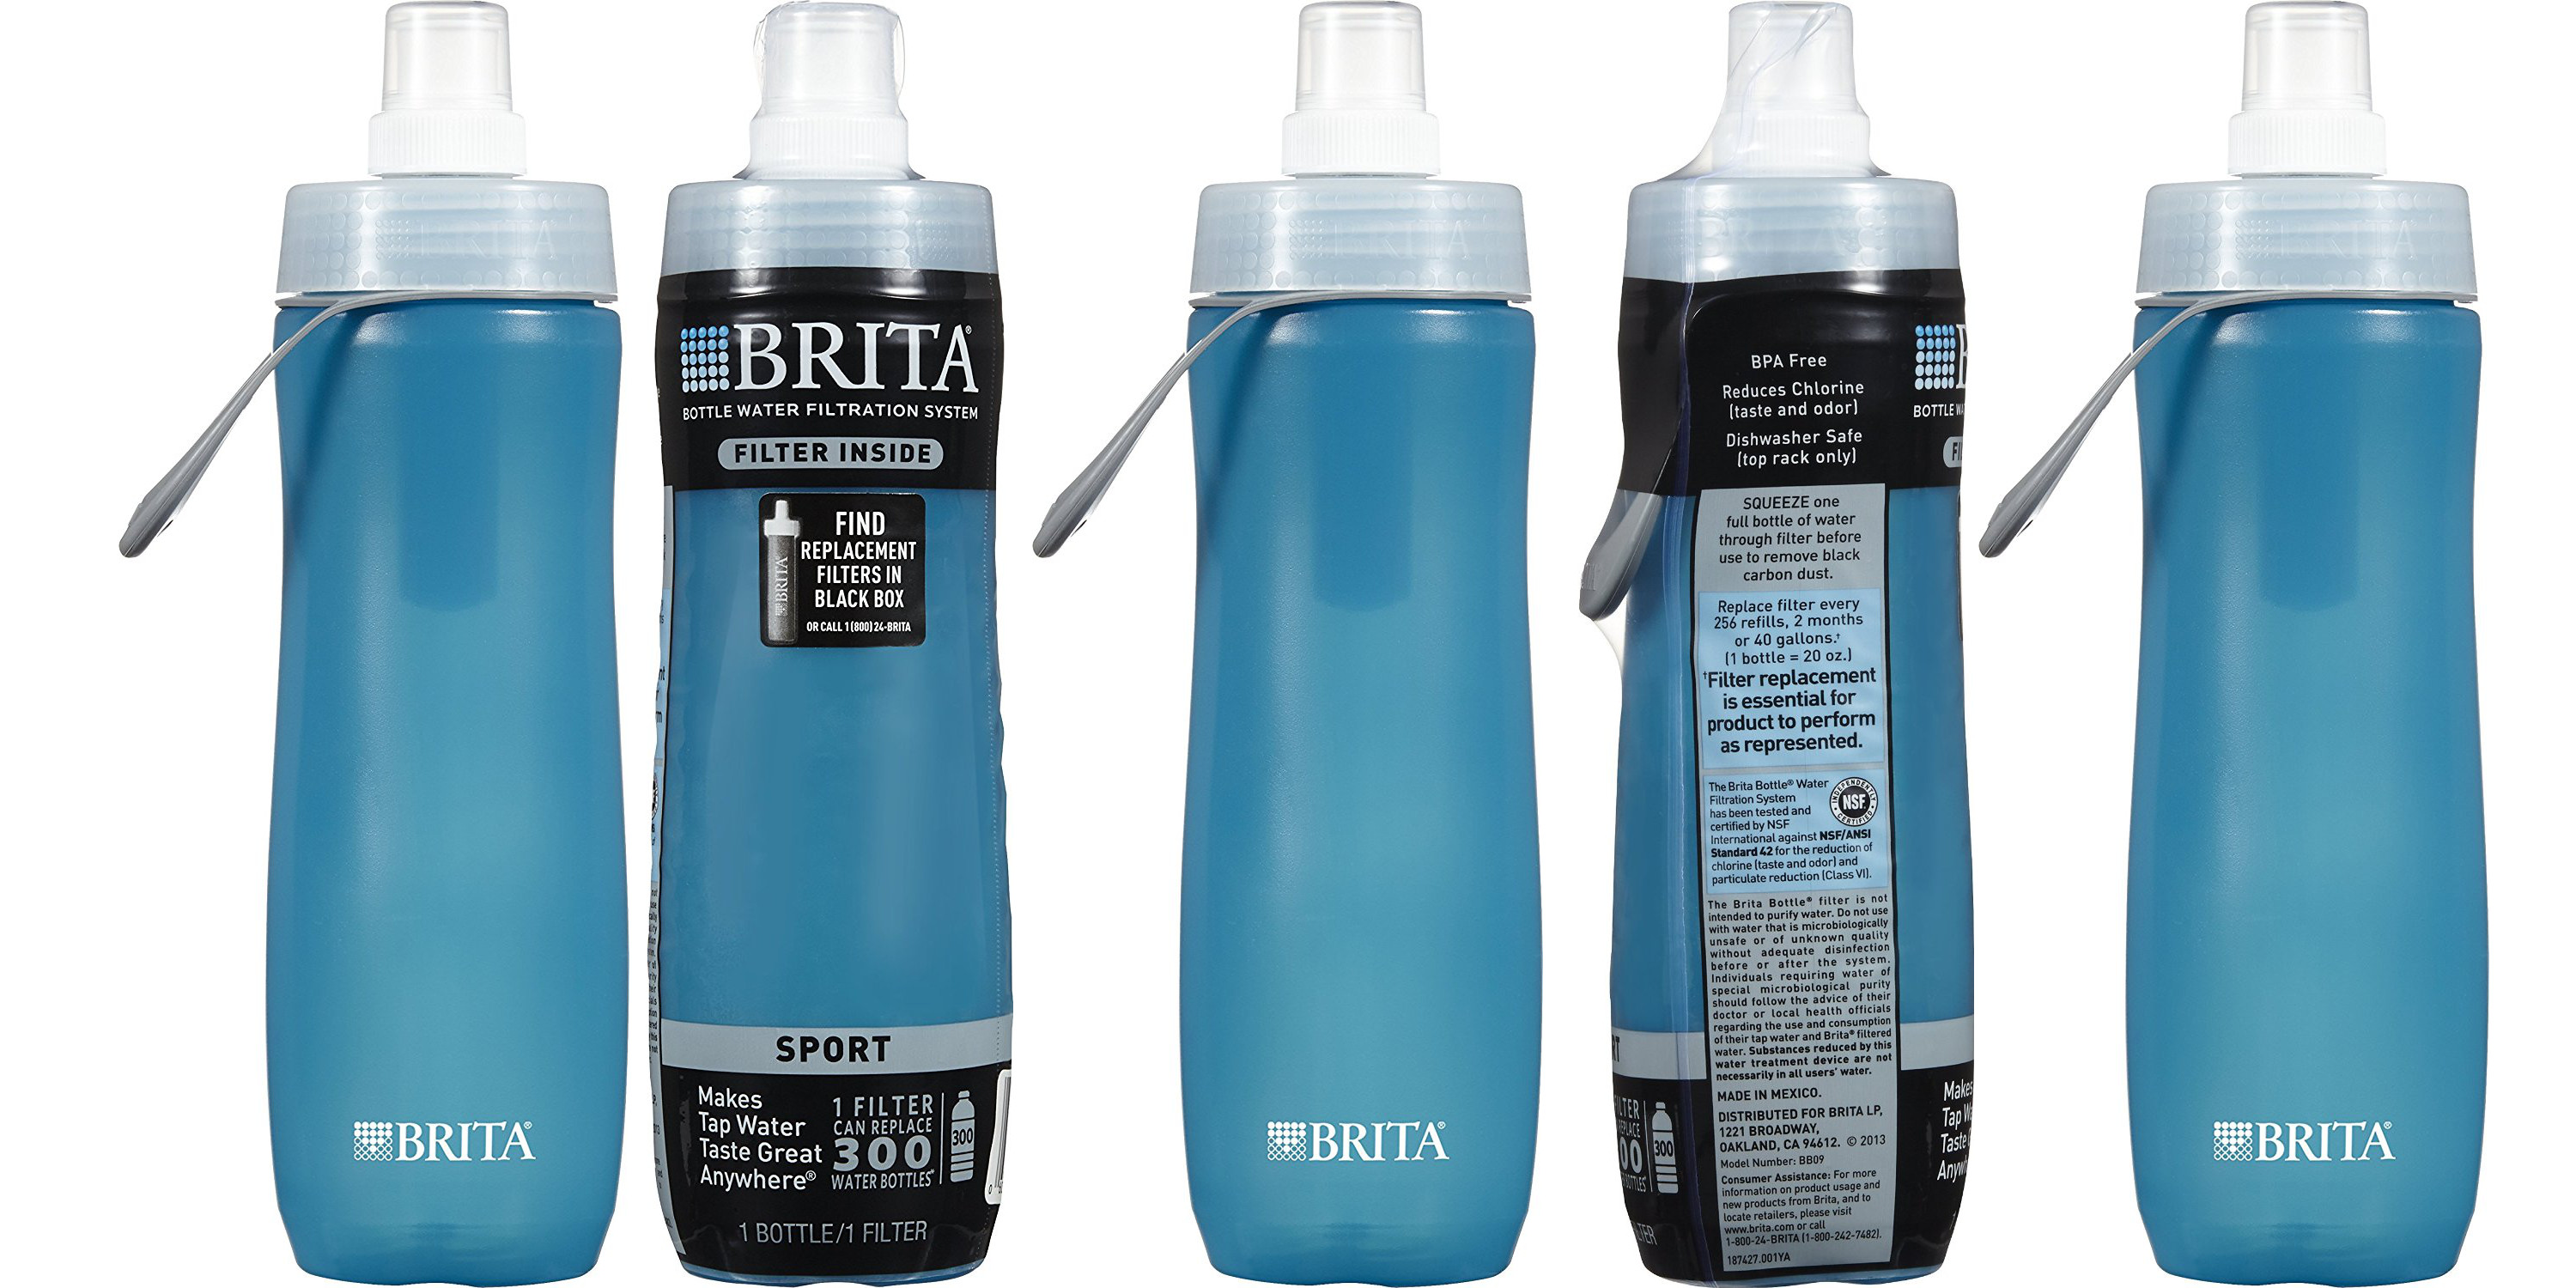 brita-filtered-sport-water-bottle-for-just-over-4-shipped-prime-only